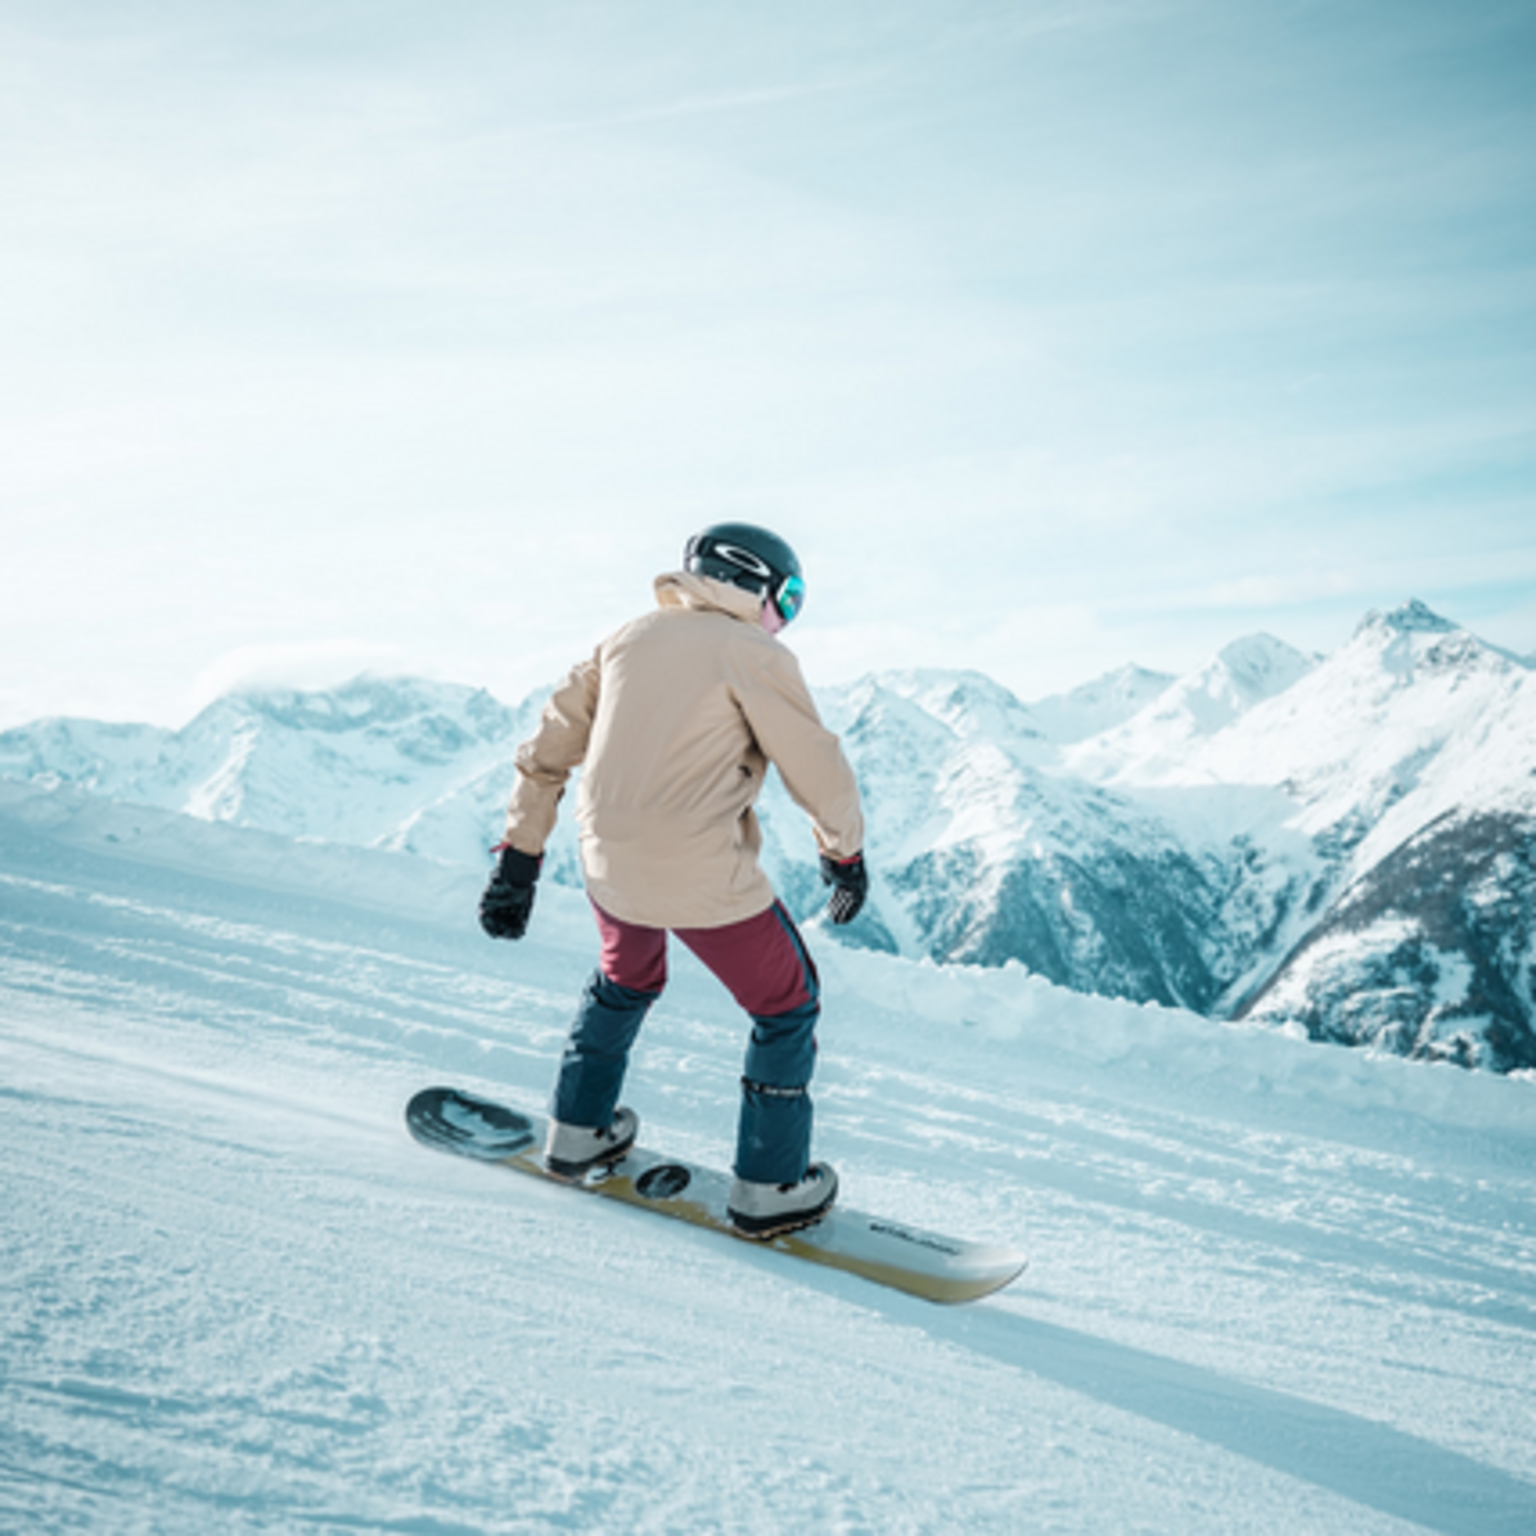 A snowboarder enjoying Grächen's perfectly groomed slopes.